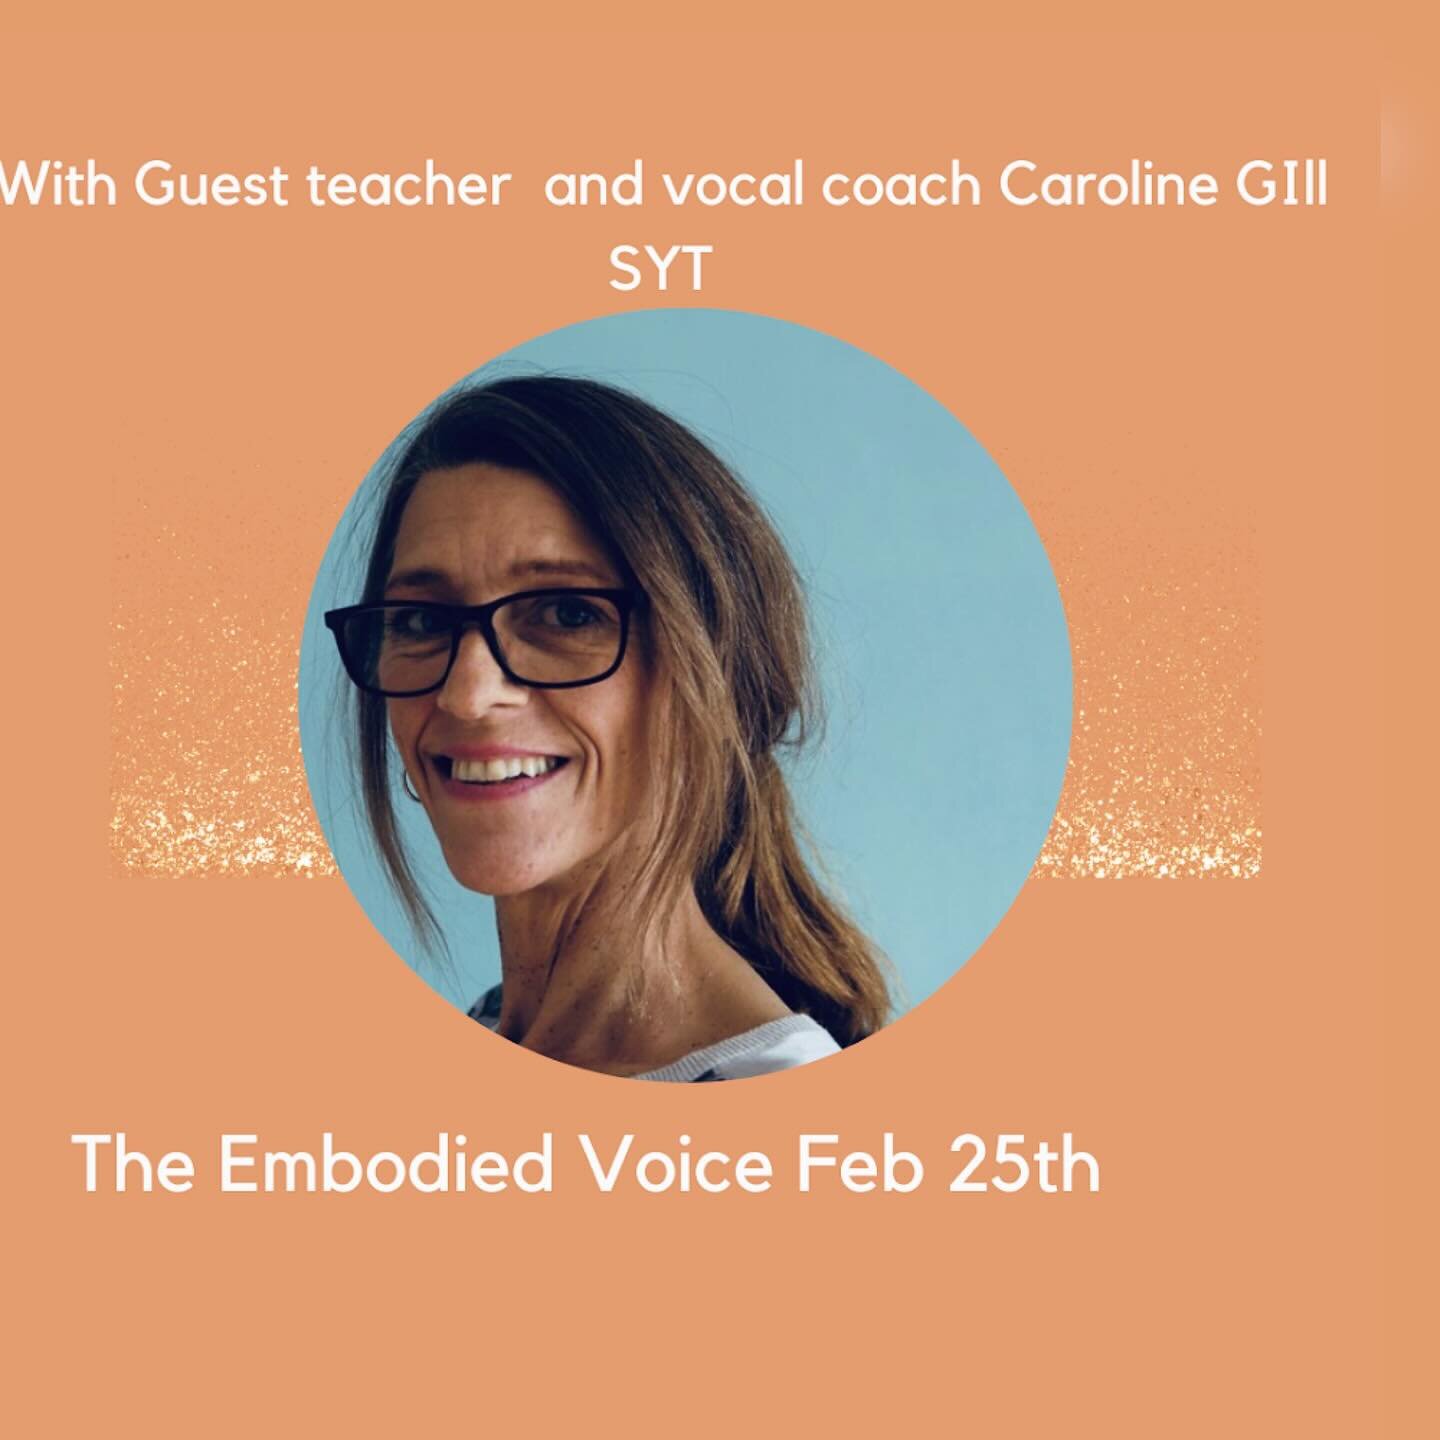 Introducing Caoroline Gill! She will be teaching a day of vocal practices for yoga Teachers on my upcoming mentoring programme! Caroline is a vocal coach, a singer, harmony vocalist and songwriter as well as being an established yoga teacher and trai